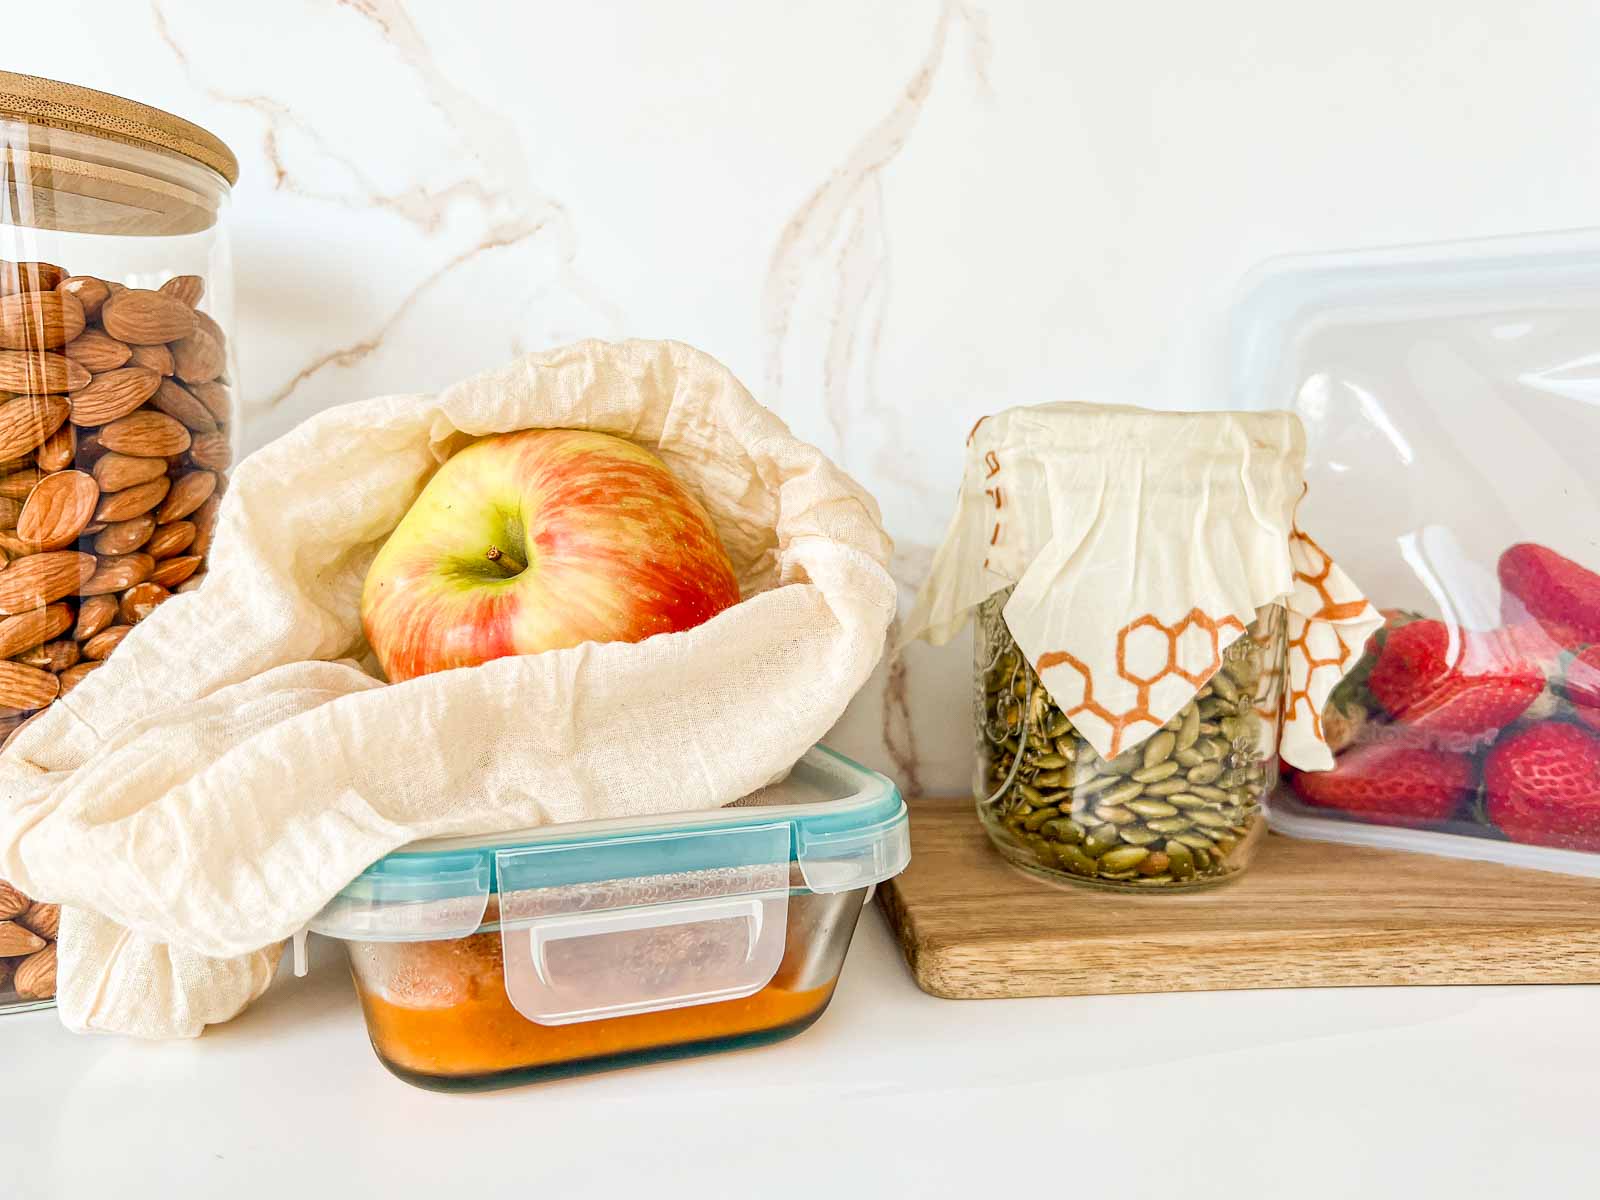 A glass jar, a glass meal prep container, a jar with wax wrap, and a Stasher bag.